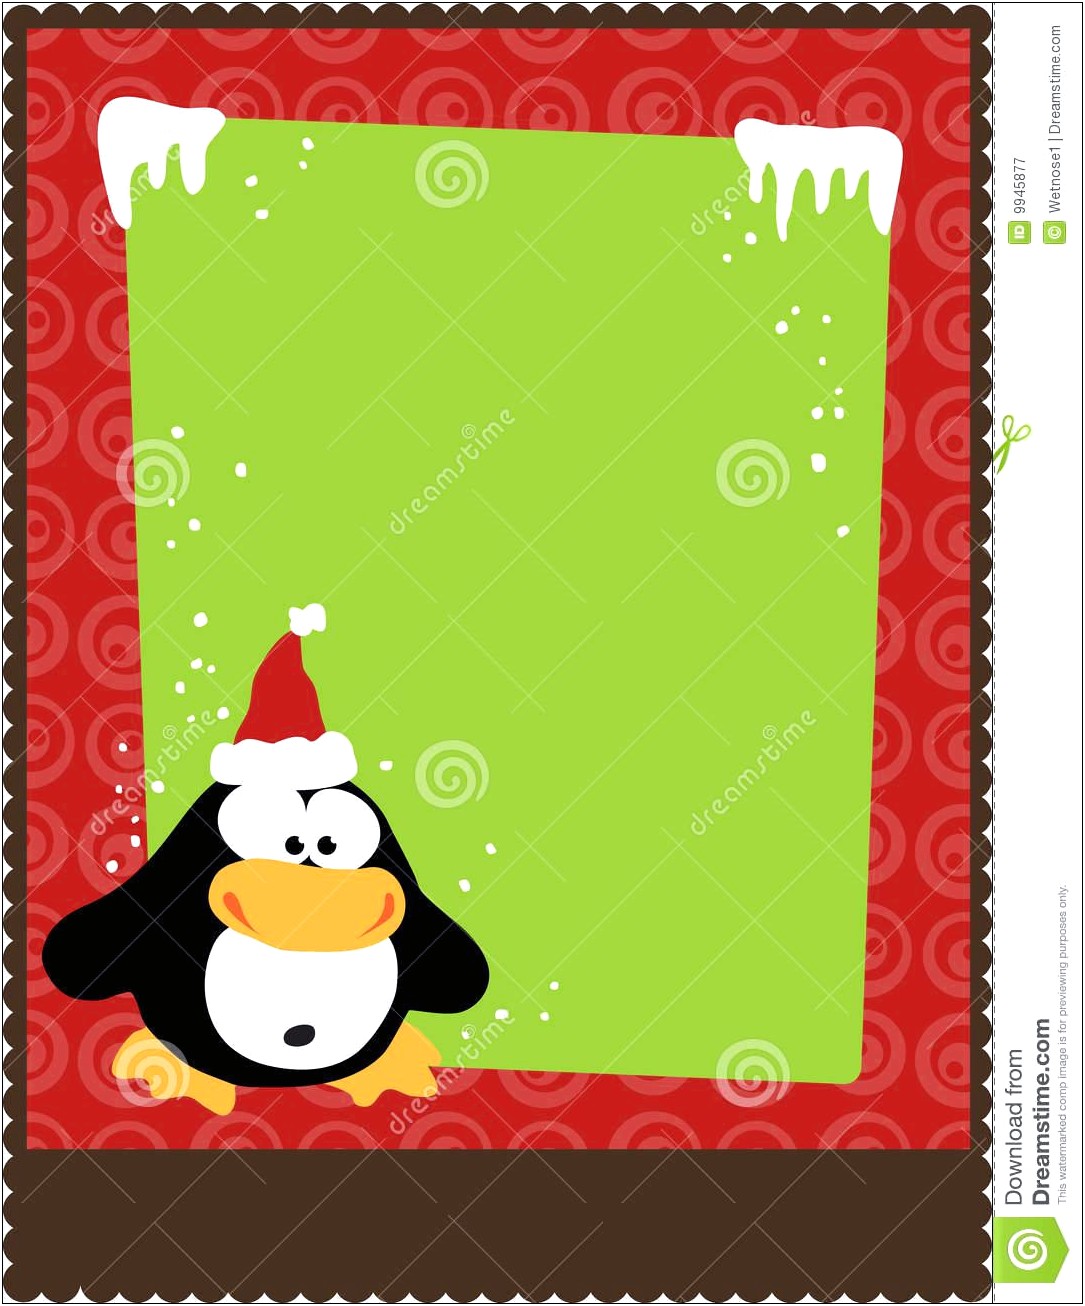 Poster Templates Free 11 X 8.5 Holiday